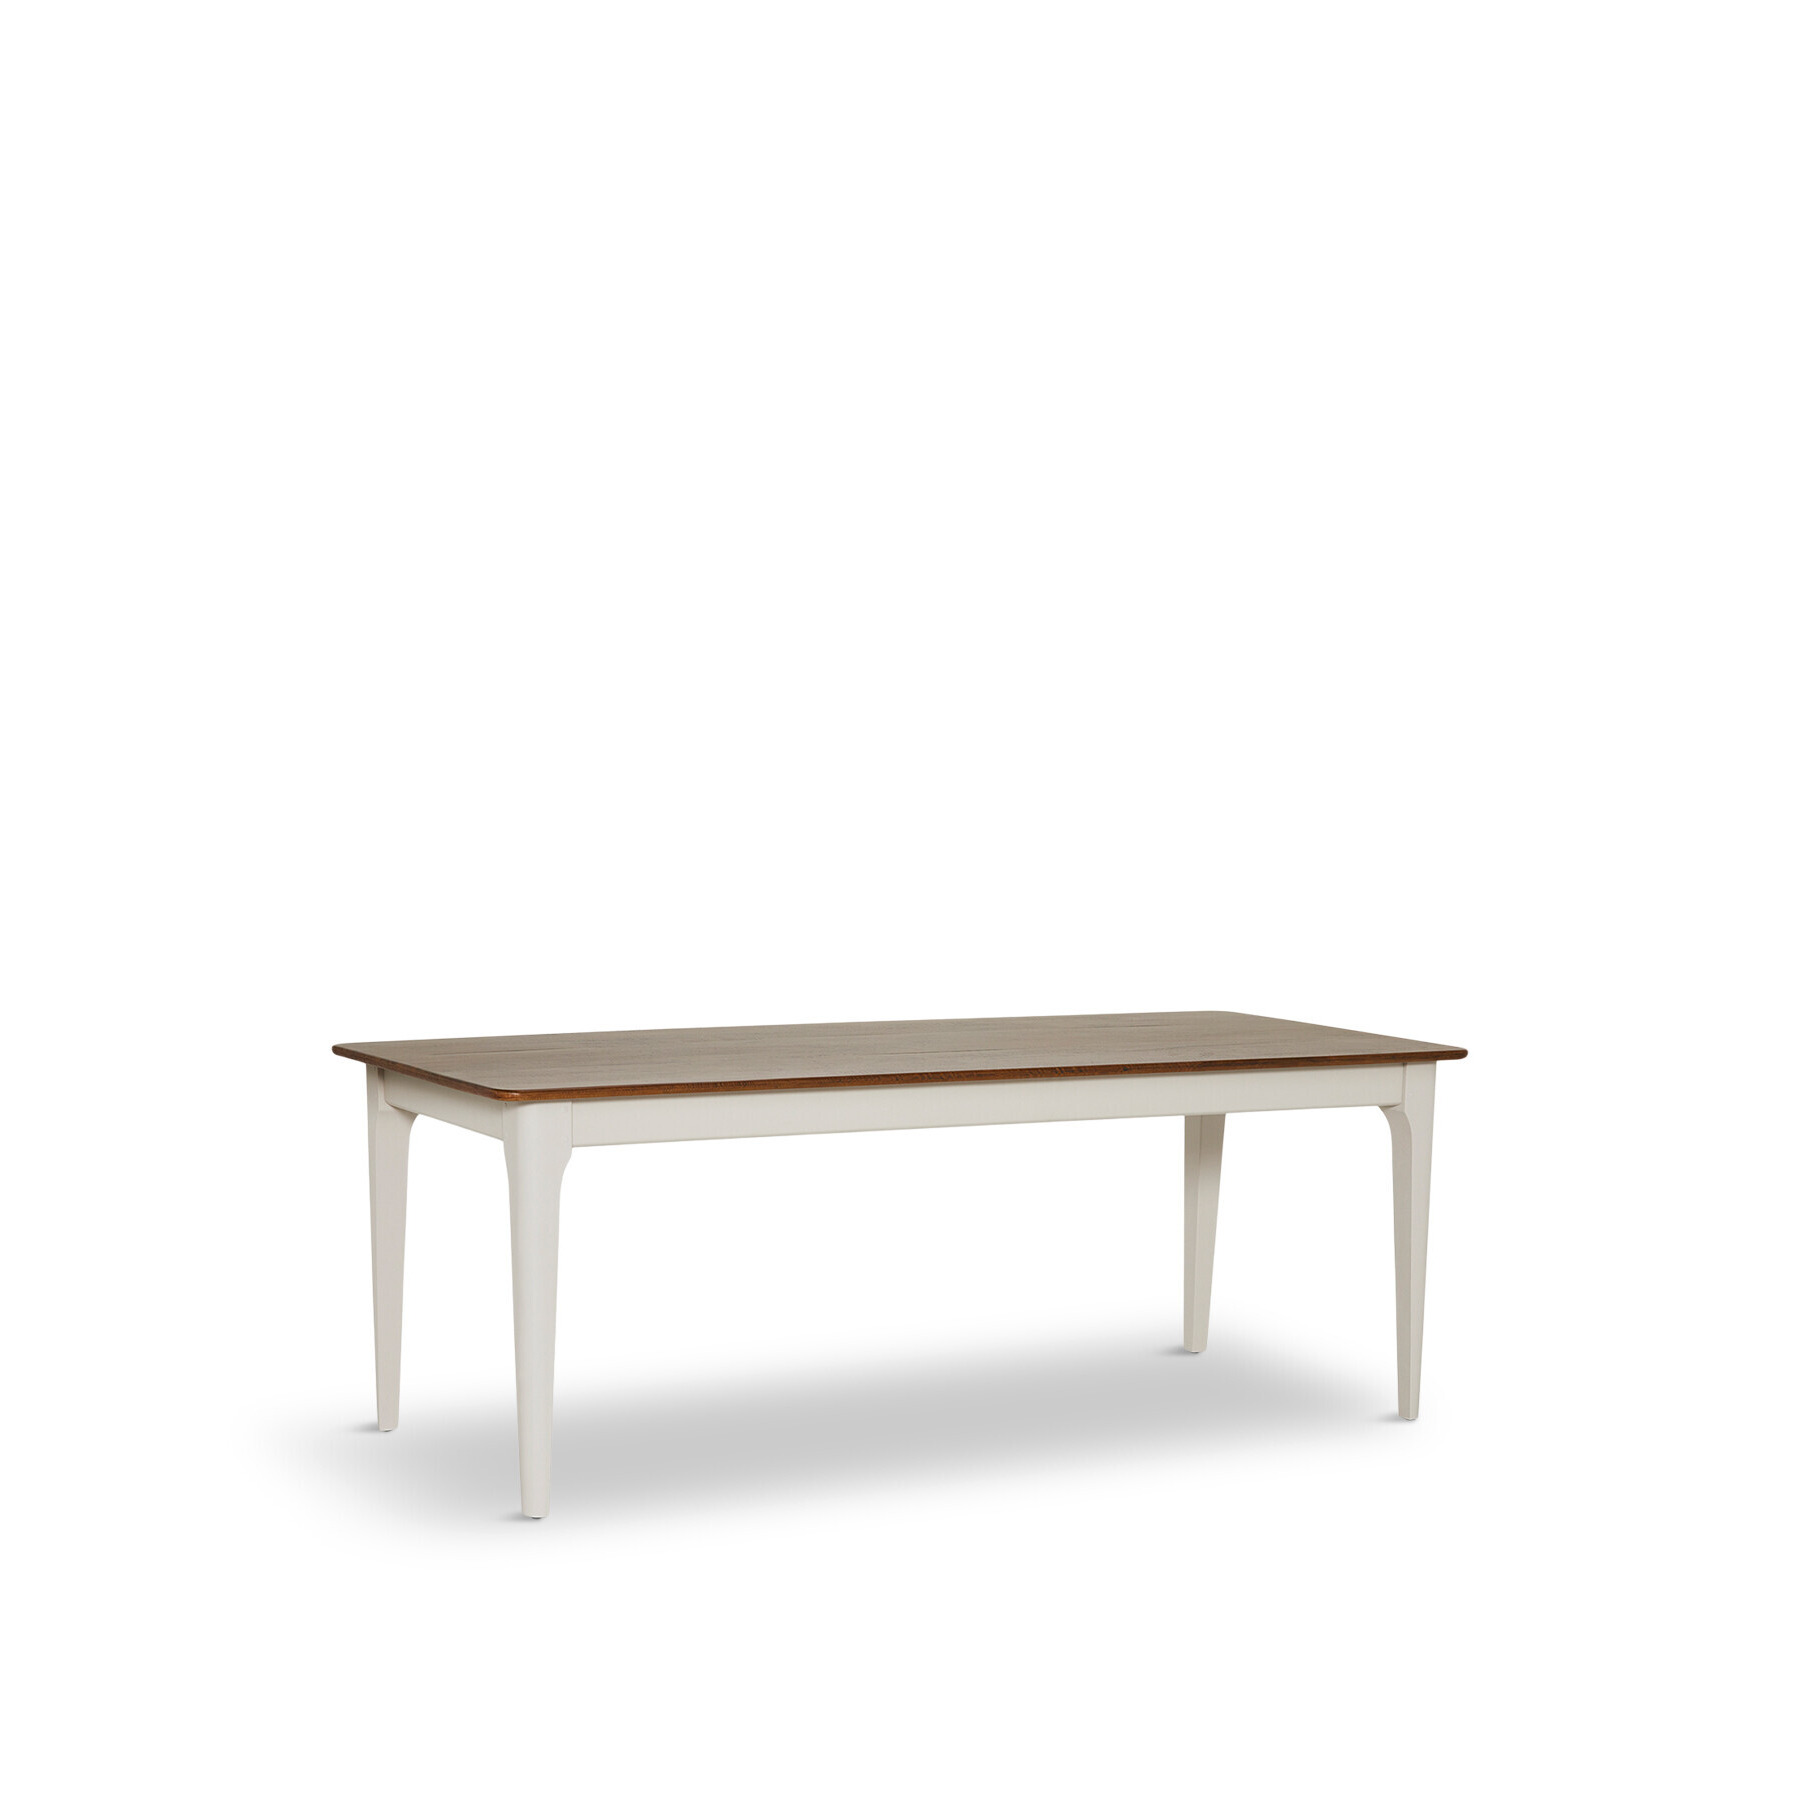 Barker and Stonehouse Mara 250cm Extending Dining Table Neutral - image 1